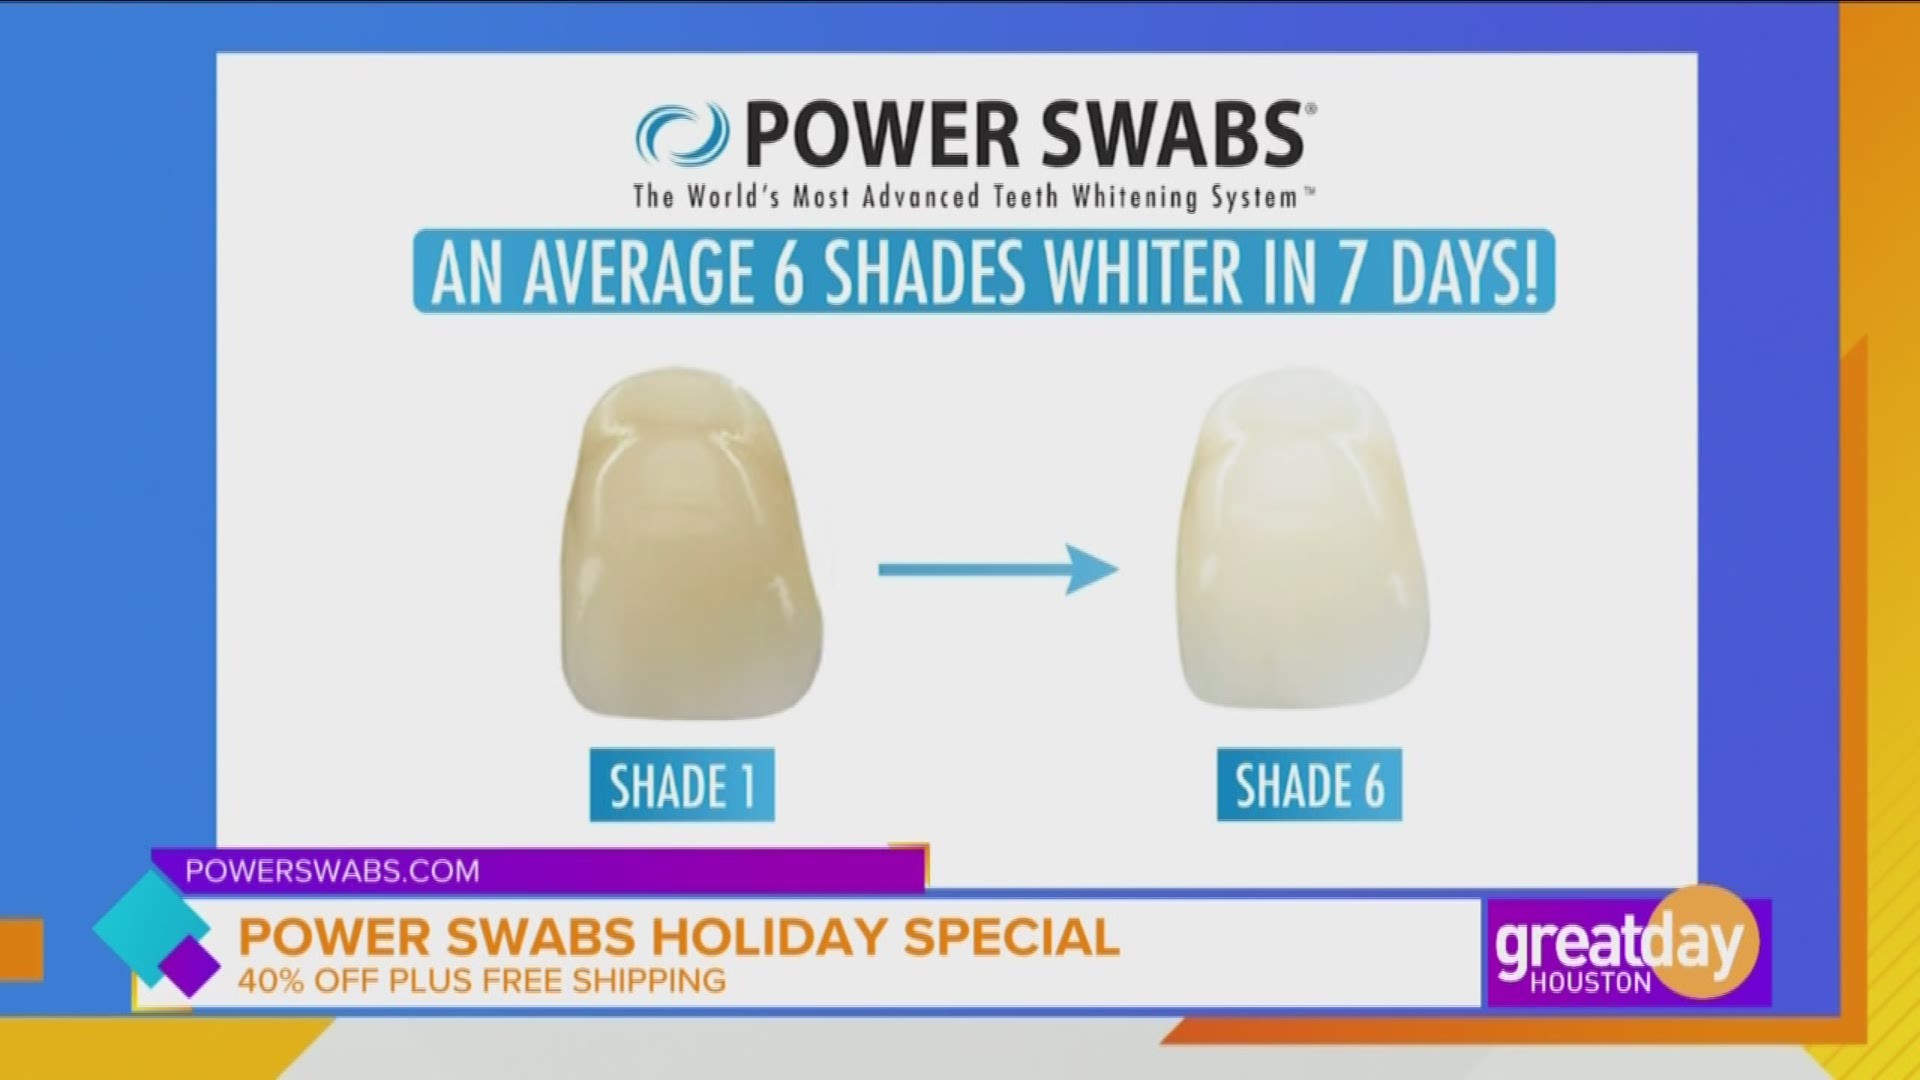 Scott DeFalco, with Power Swabs, stopped by to show us how you can whiten your teeth in minutes.